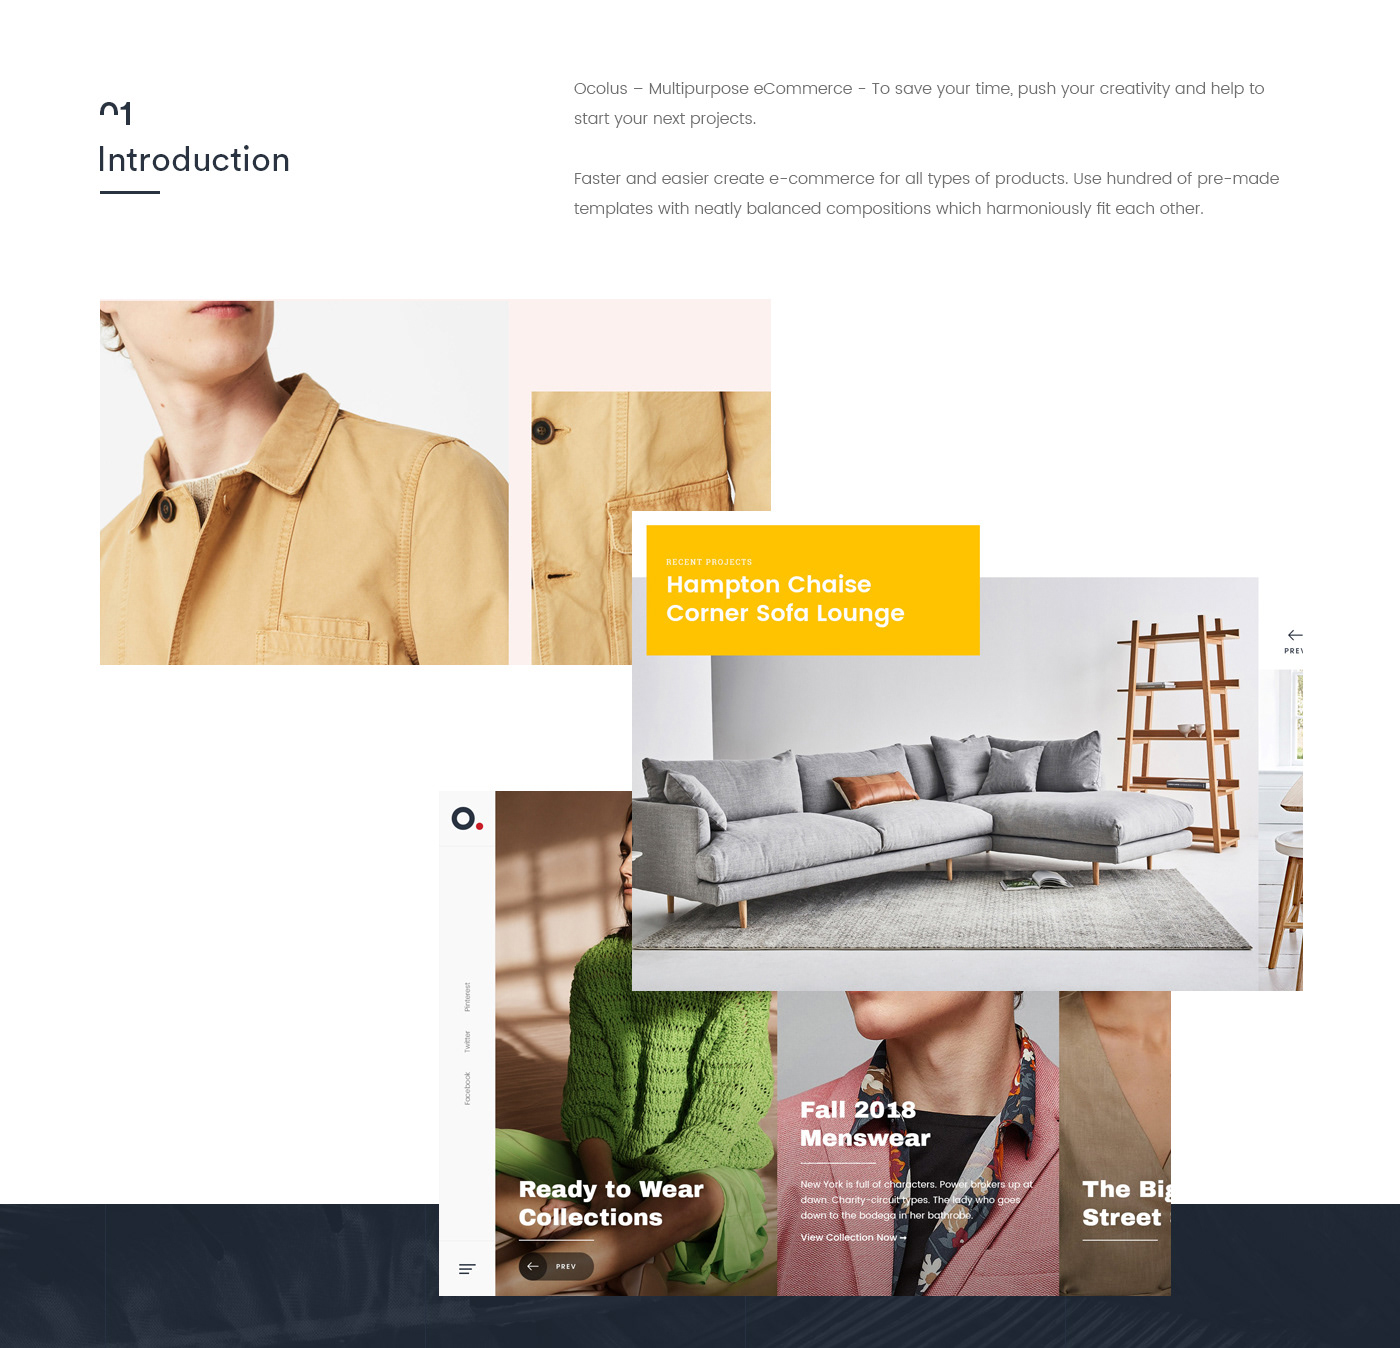 free download Ecommerce Theme psd Fashion  template modern layout clean layout furniture watch